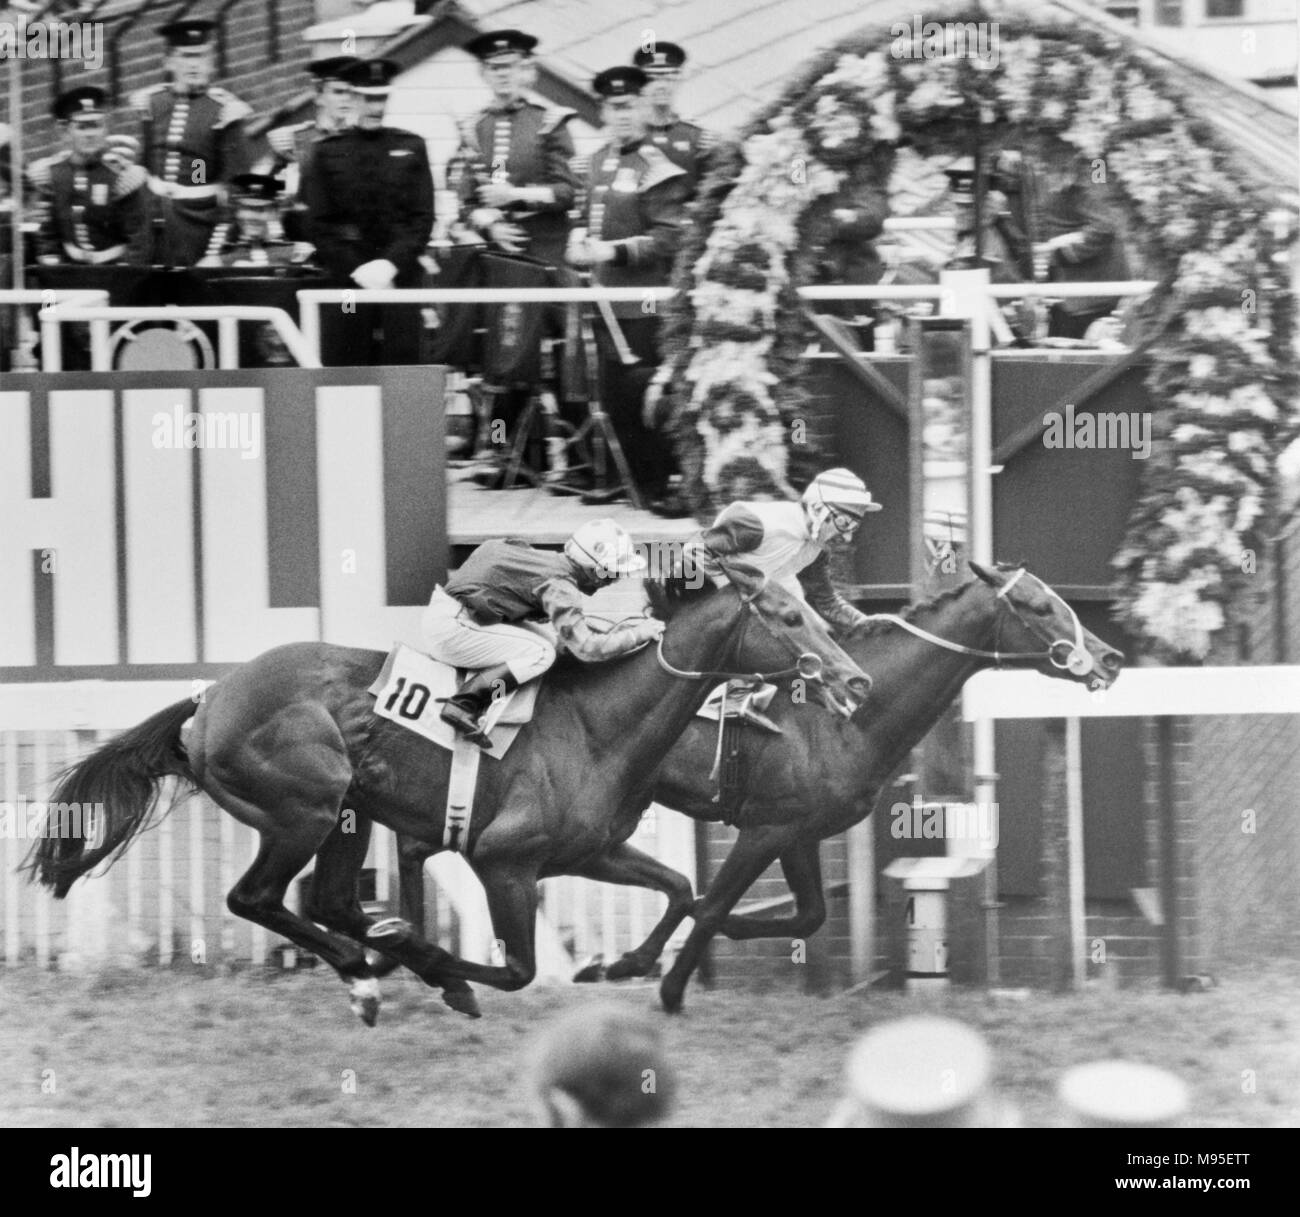 7th June 1978. Greville Starkey, riding Shirley heights, narrowly beats Hawaiian Sound, ride by the American jockey Willie Shoemaker, in the 1978 Epsom Derby in England. Stock Photo